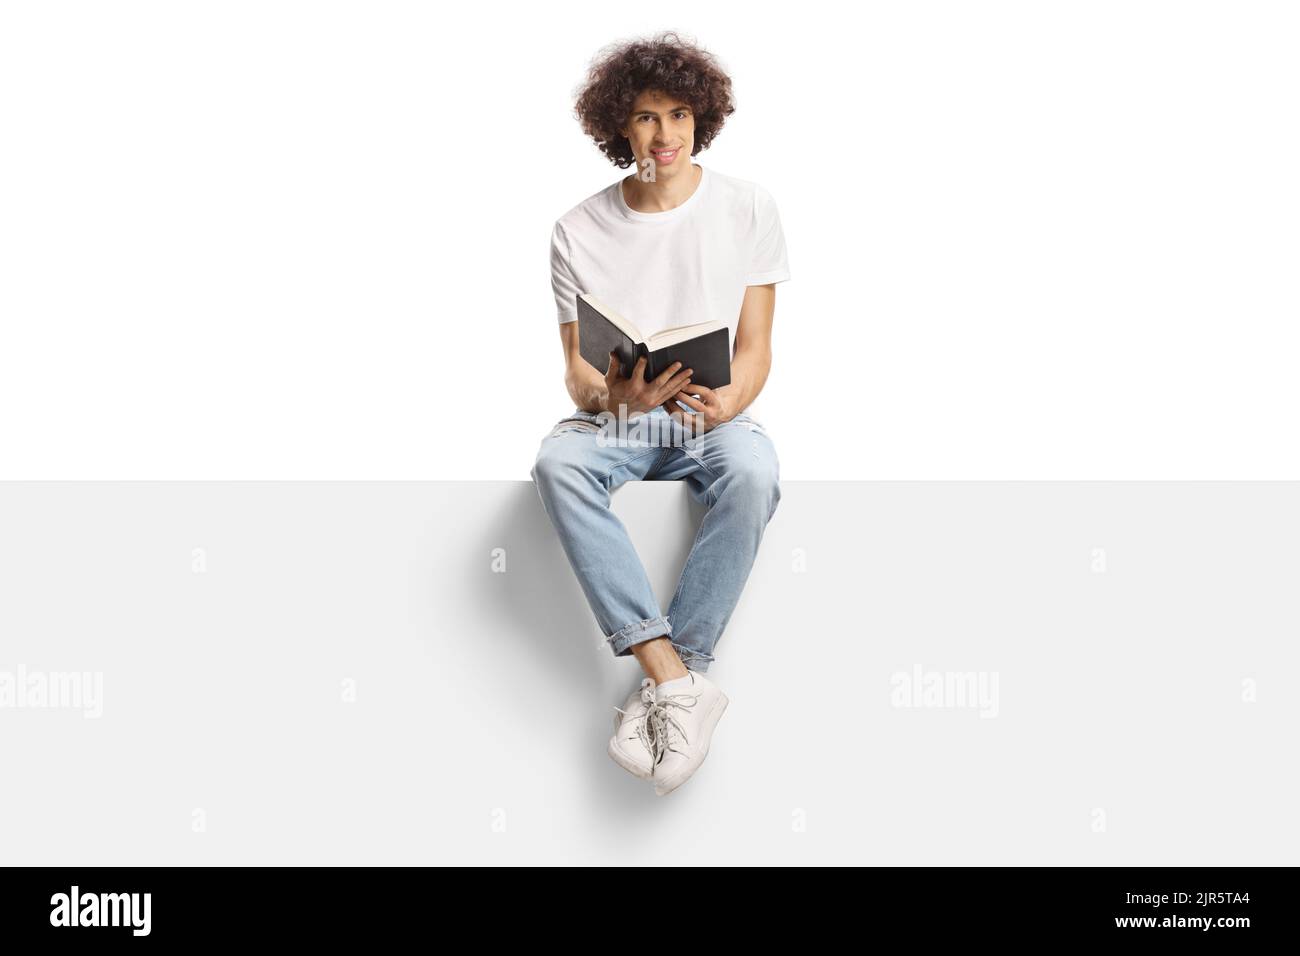 Young man with curly hair sitting on a panel and holding an open book isolated on white background Stock Photo